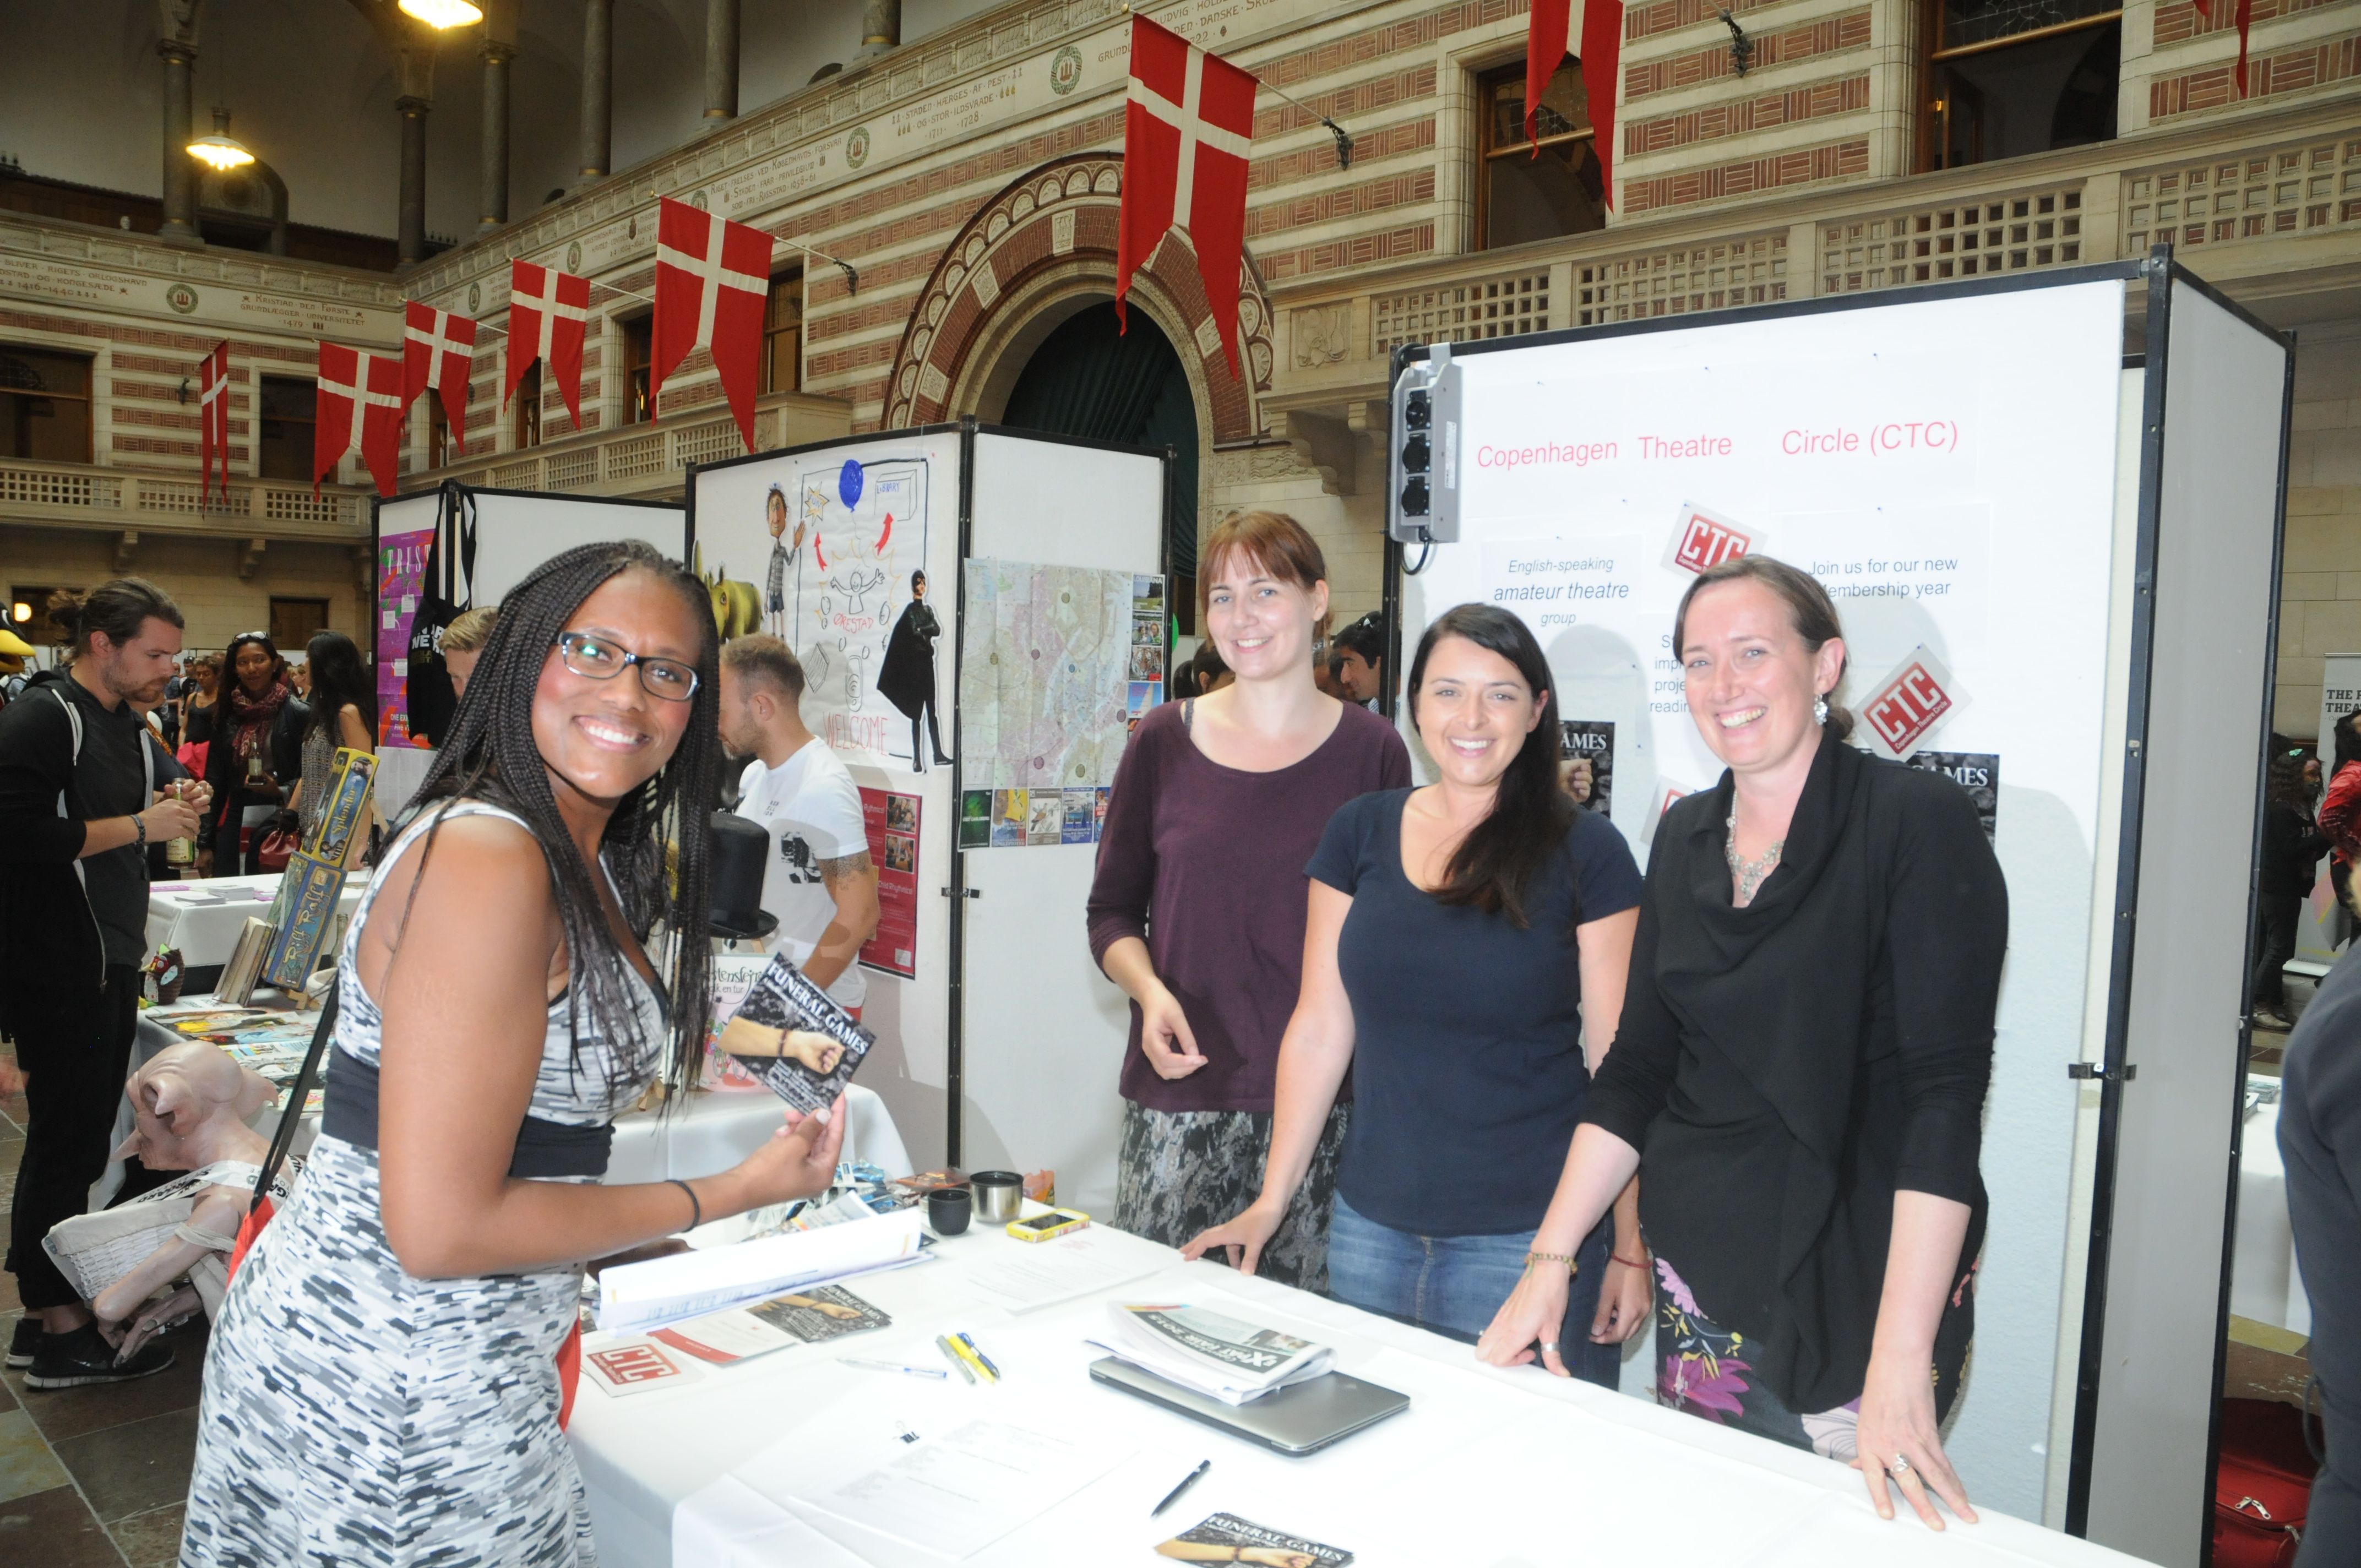 Out & About: Pancakes and handshakes at the Expat Fair